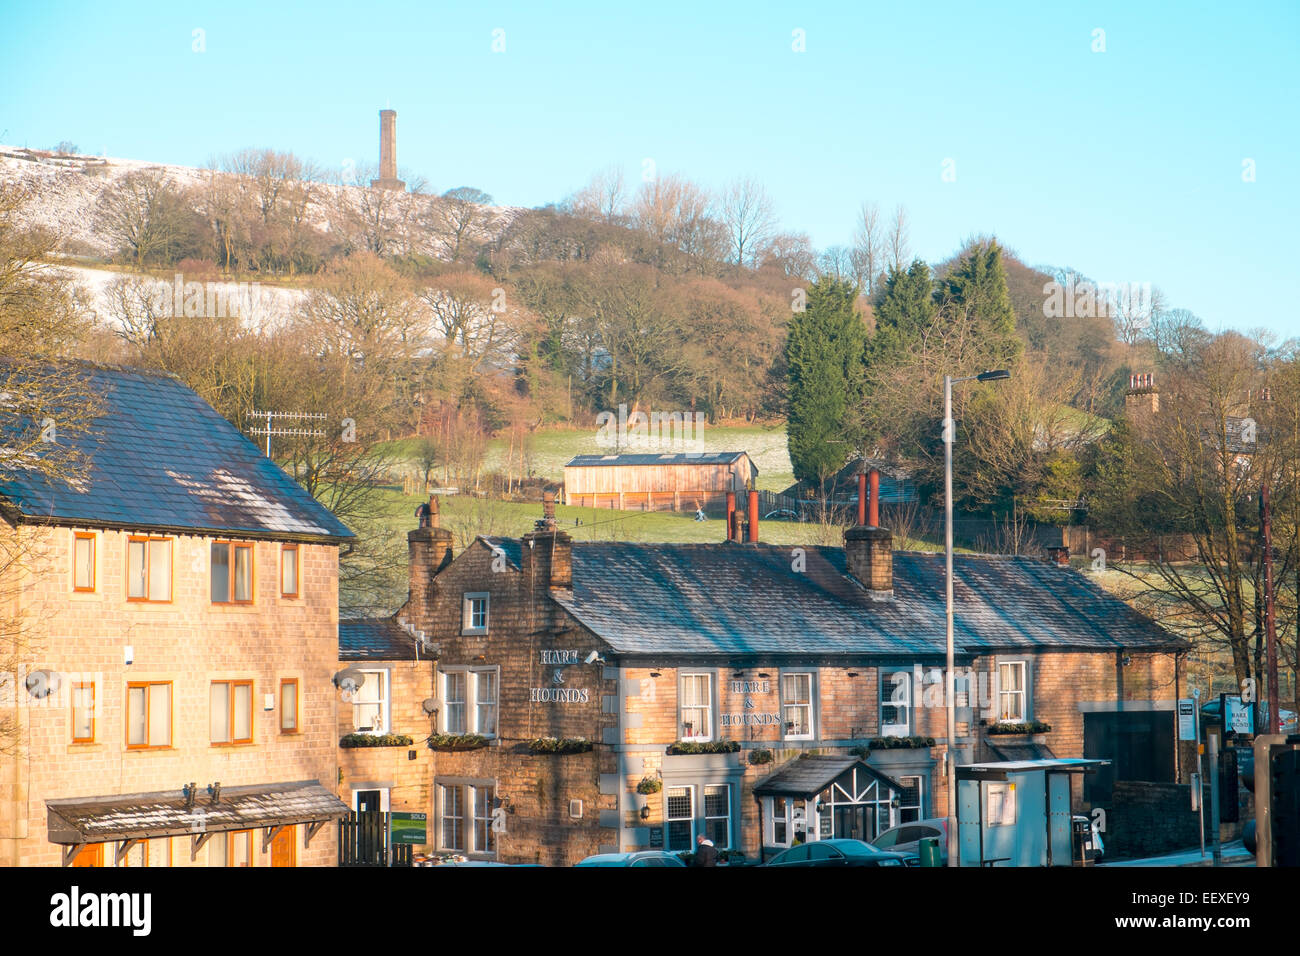 Holcombe brook a village in Lancashire with Peel tower on holcombe hill in the background, tribute to the former Prime Minister Stock Photo